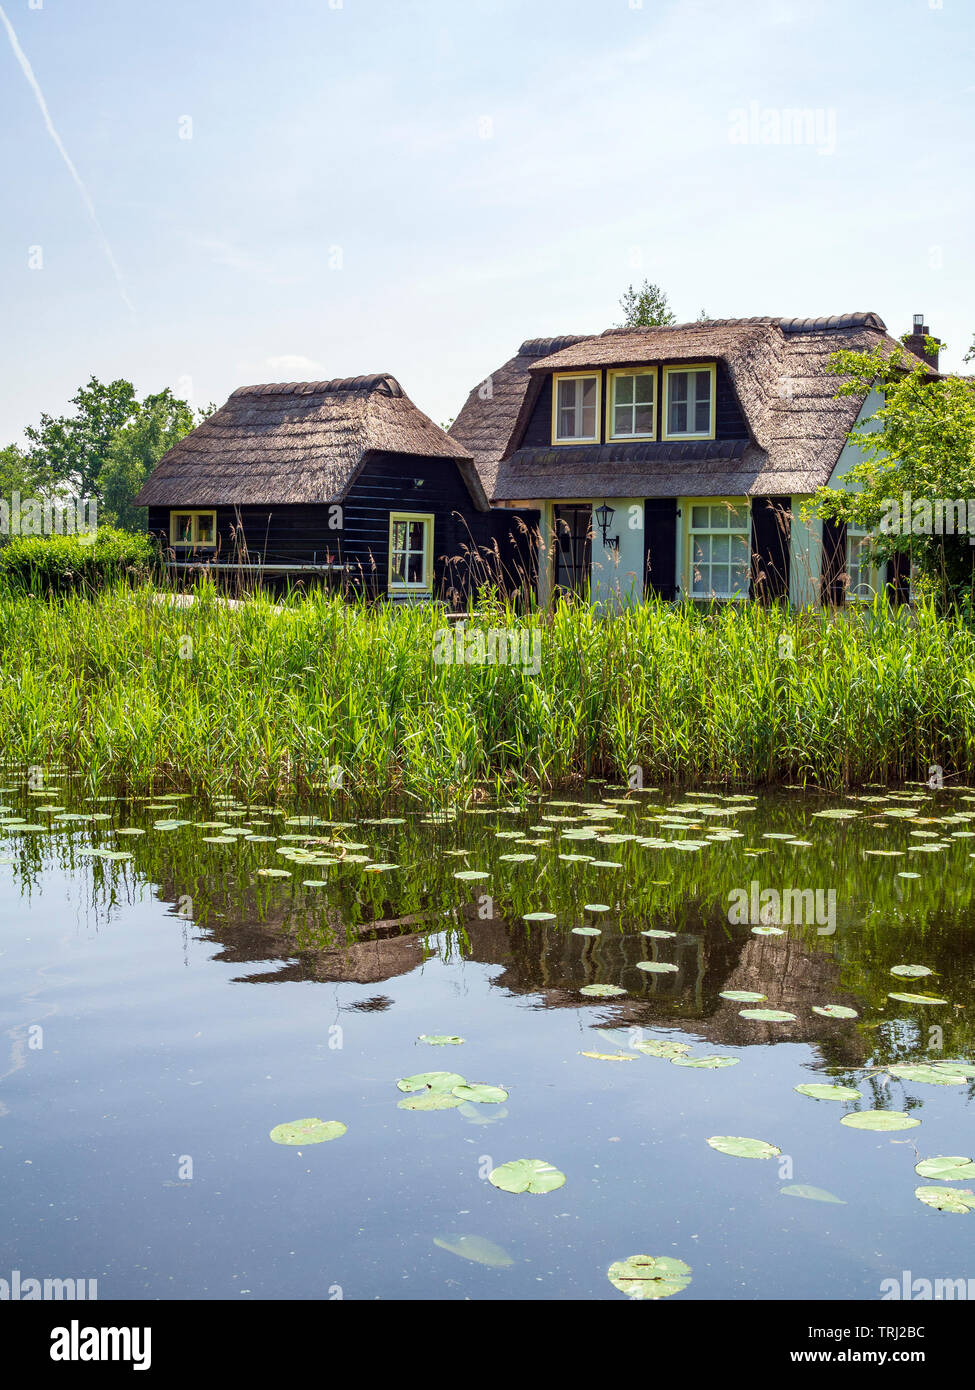 A house in traditional style on the lake 'Ankeveense Plassen', created by peat harvesting, in Ankeveen, The Netherlands. Stock Photo